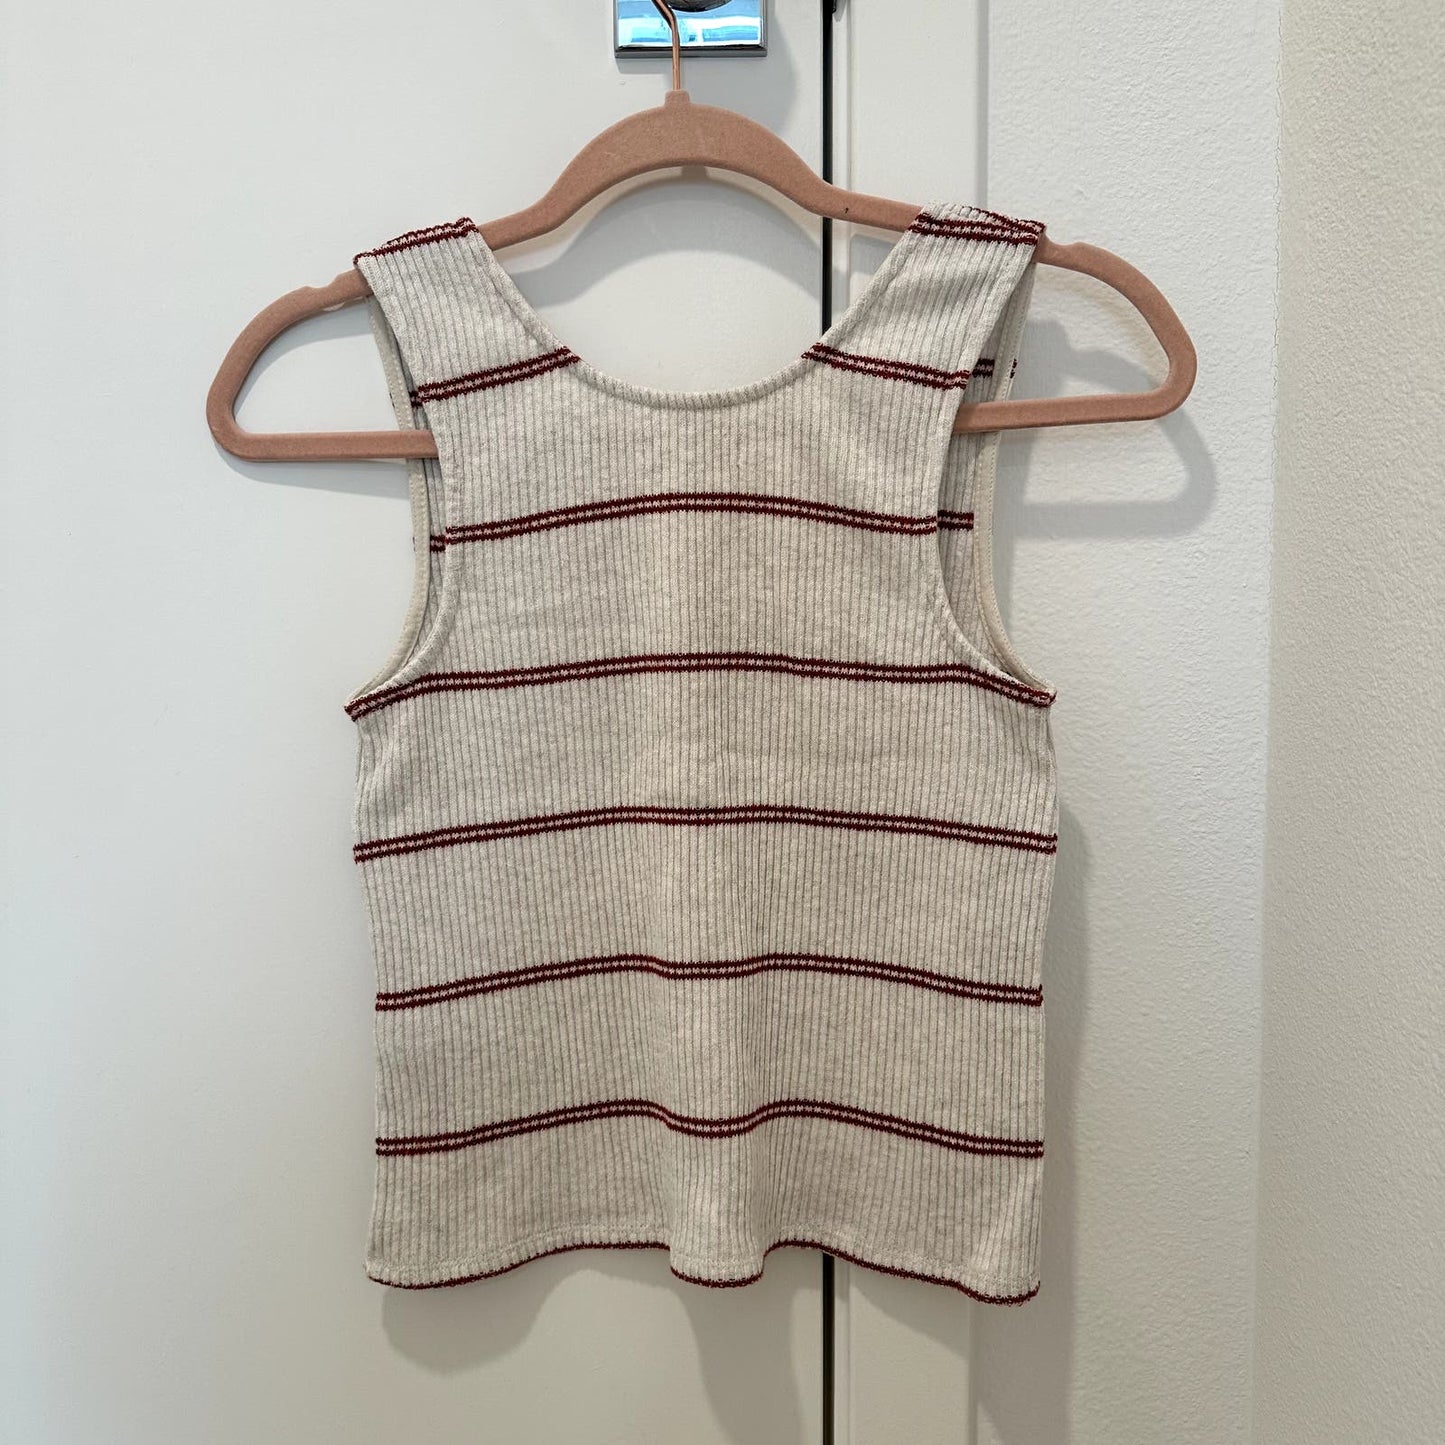 Madewell ribbed button front striped tank top